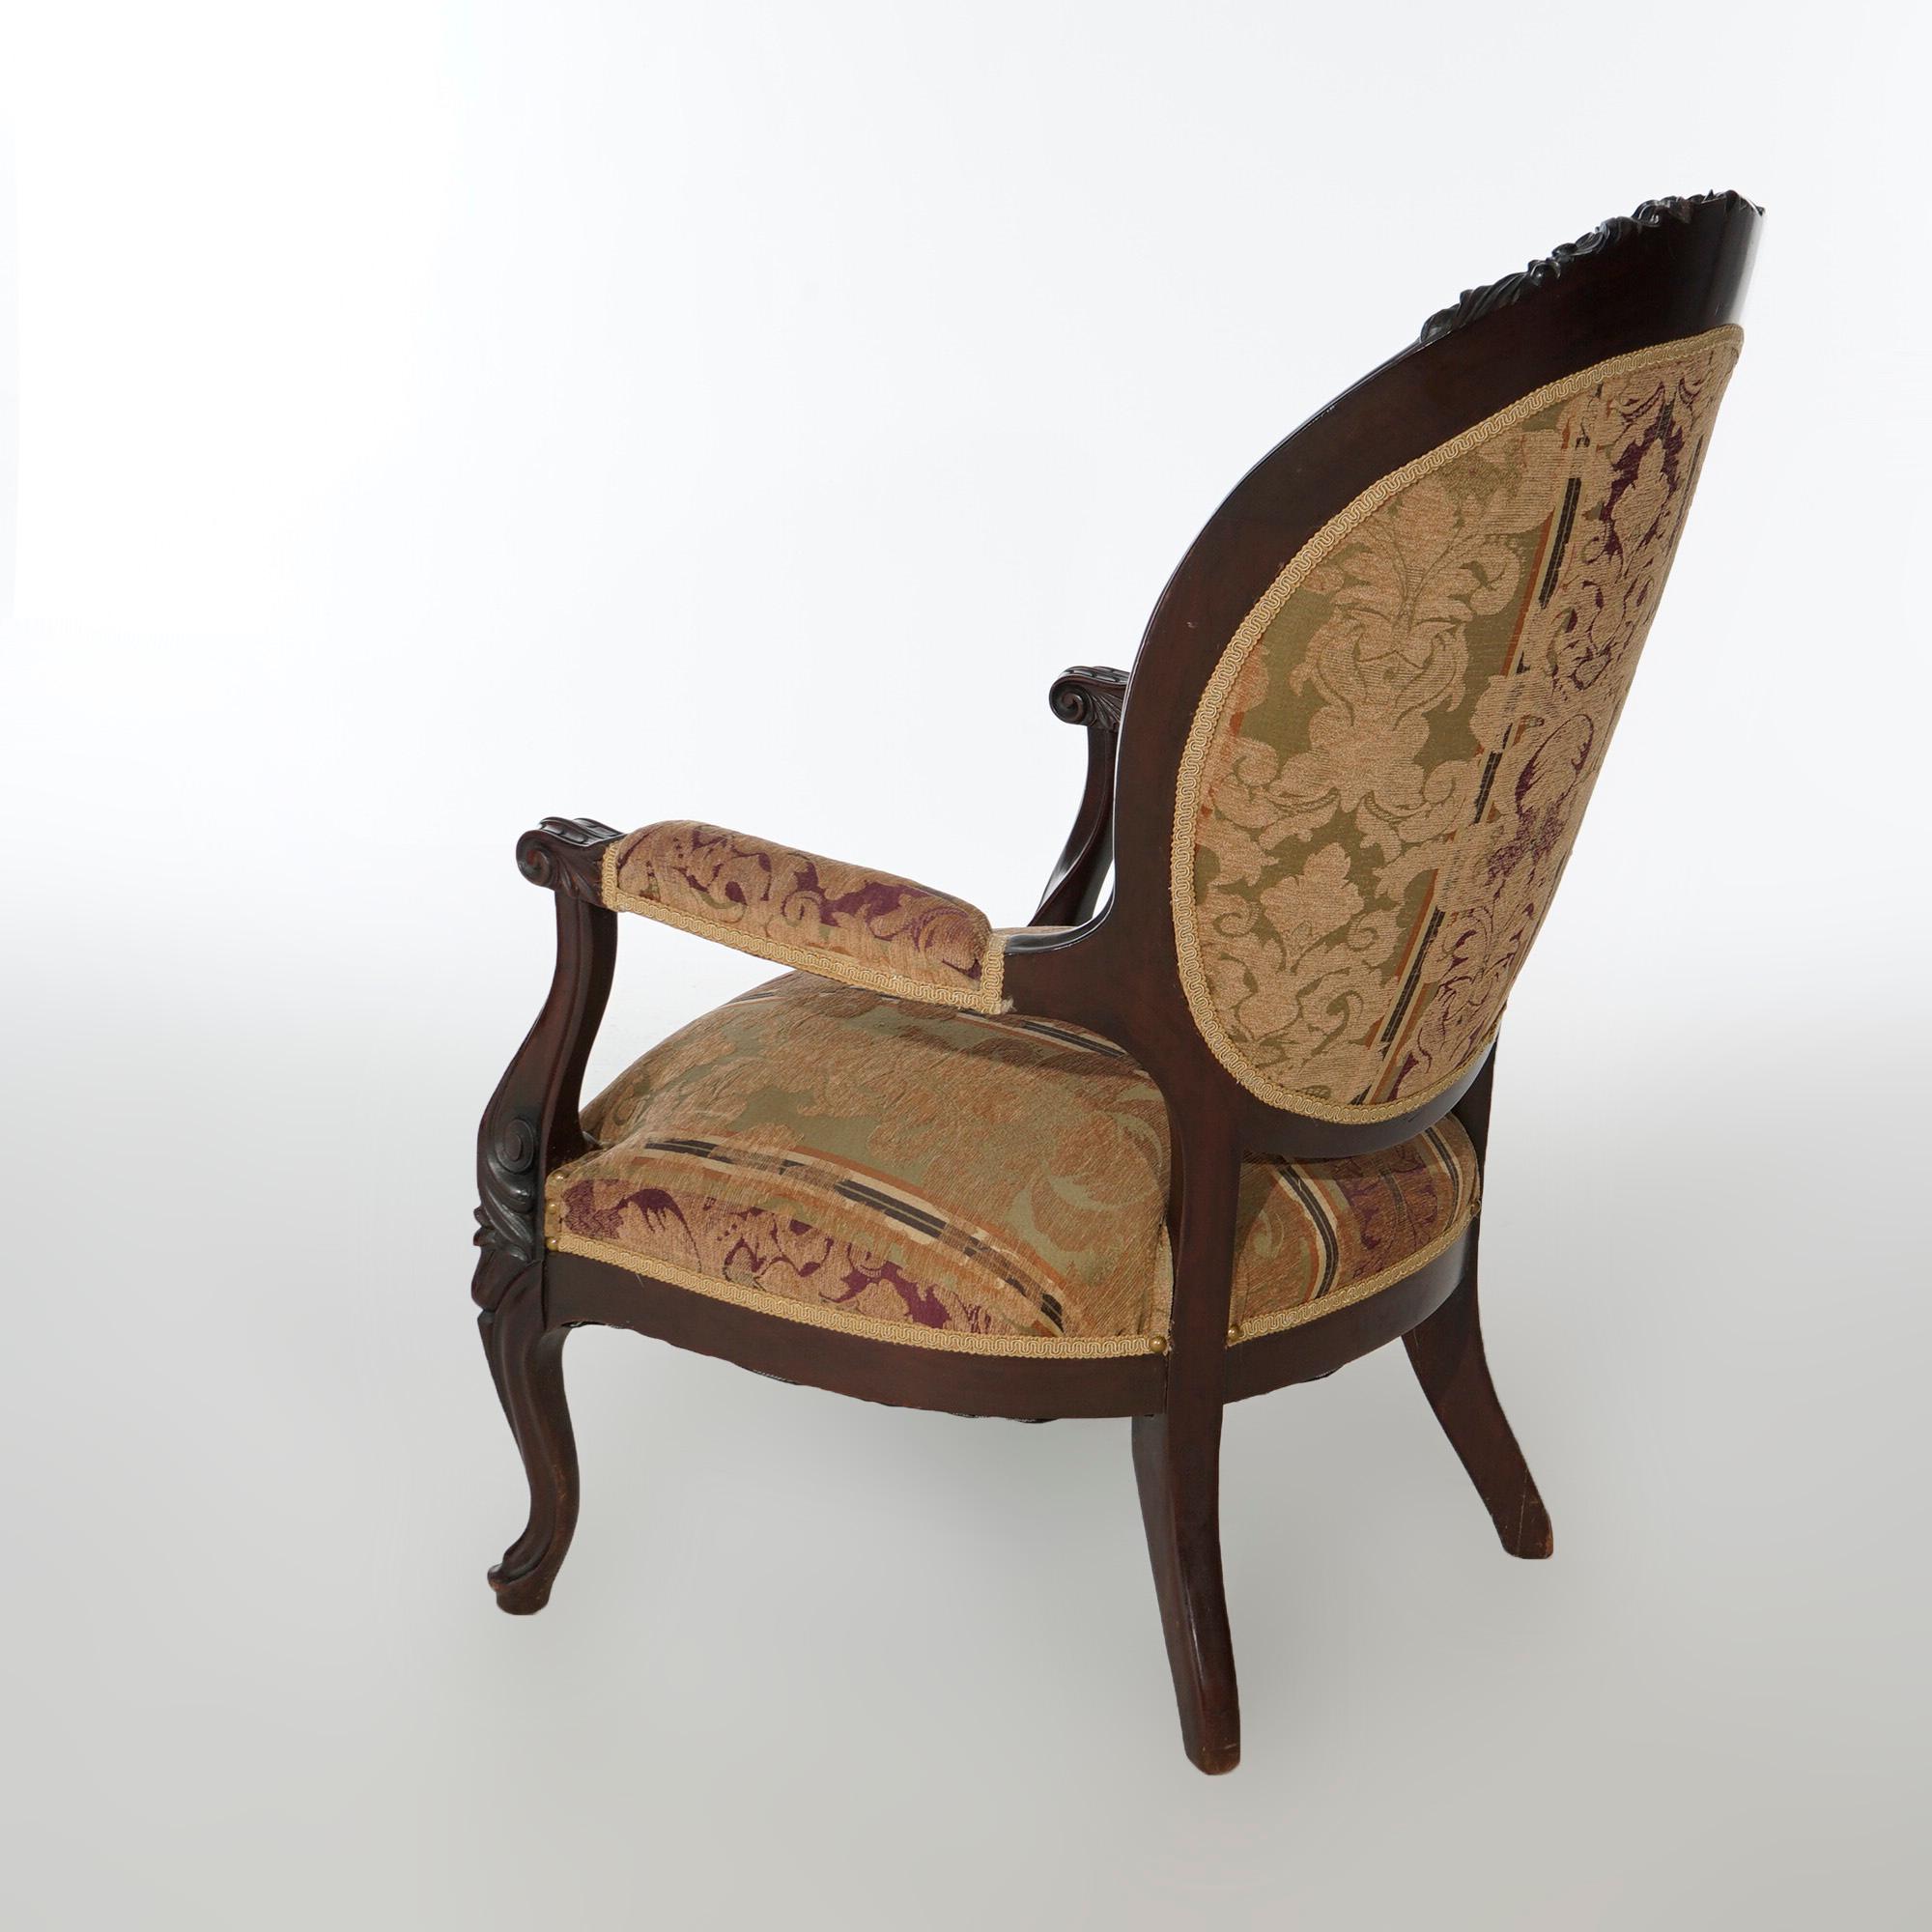 19th Century Antique Victorian Carved Walnut Upholstered Parlor Arm Chair Circa 1890 For Sale